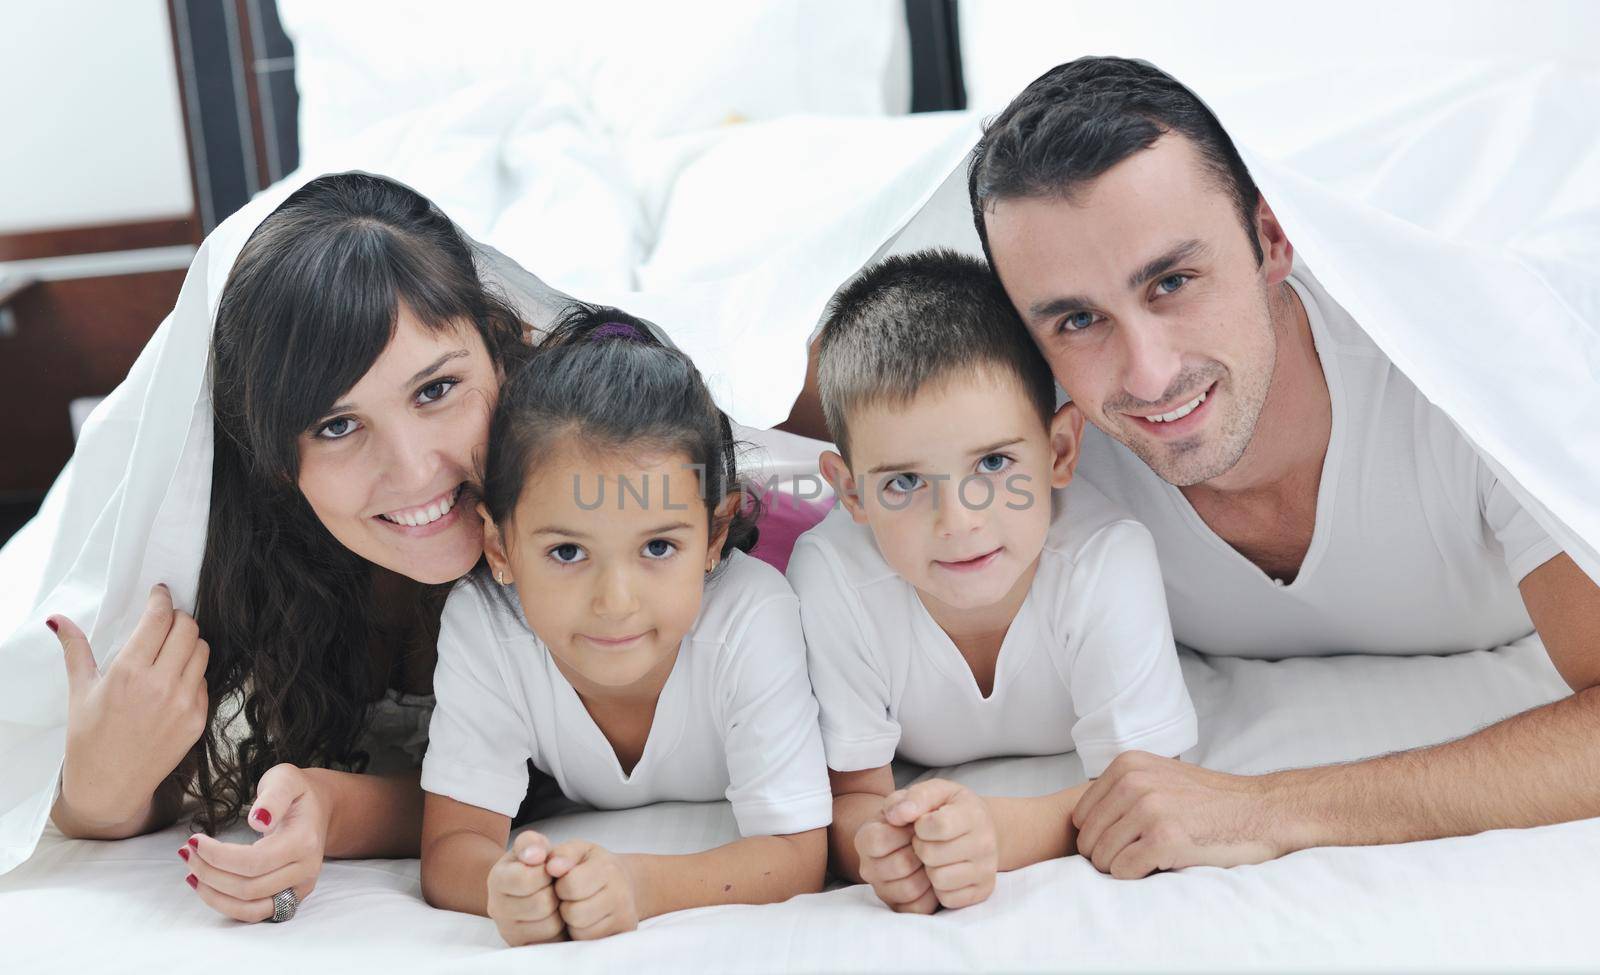 happy young Family in their bedroom have fun and play in bed